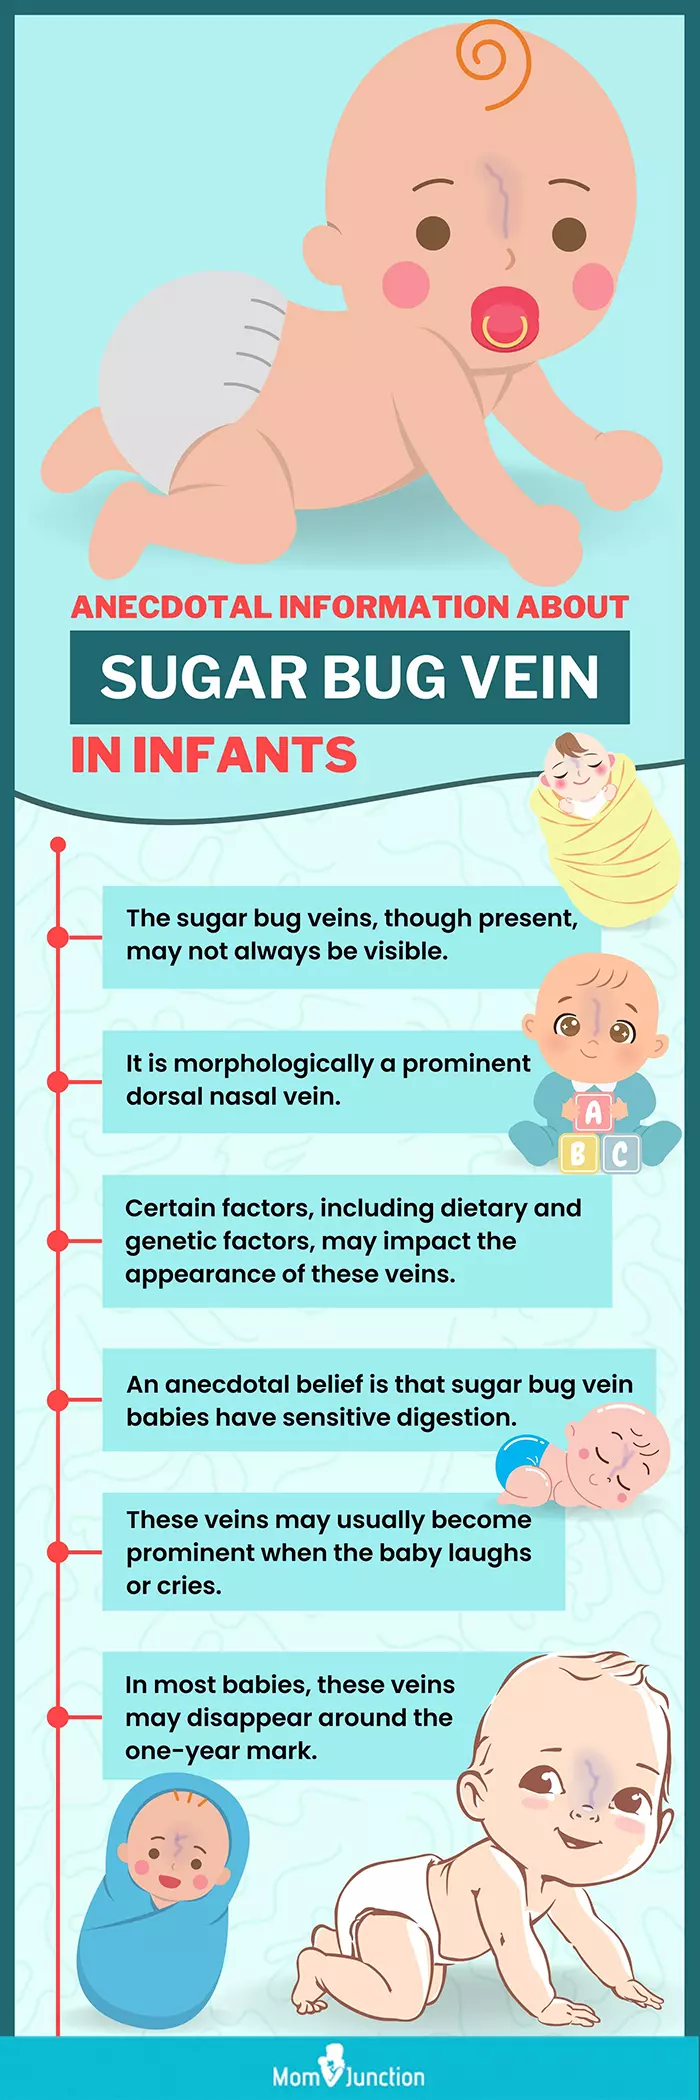 anecdotal information about sugar bug vein in infants (infographic)